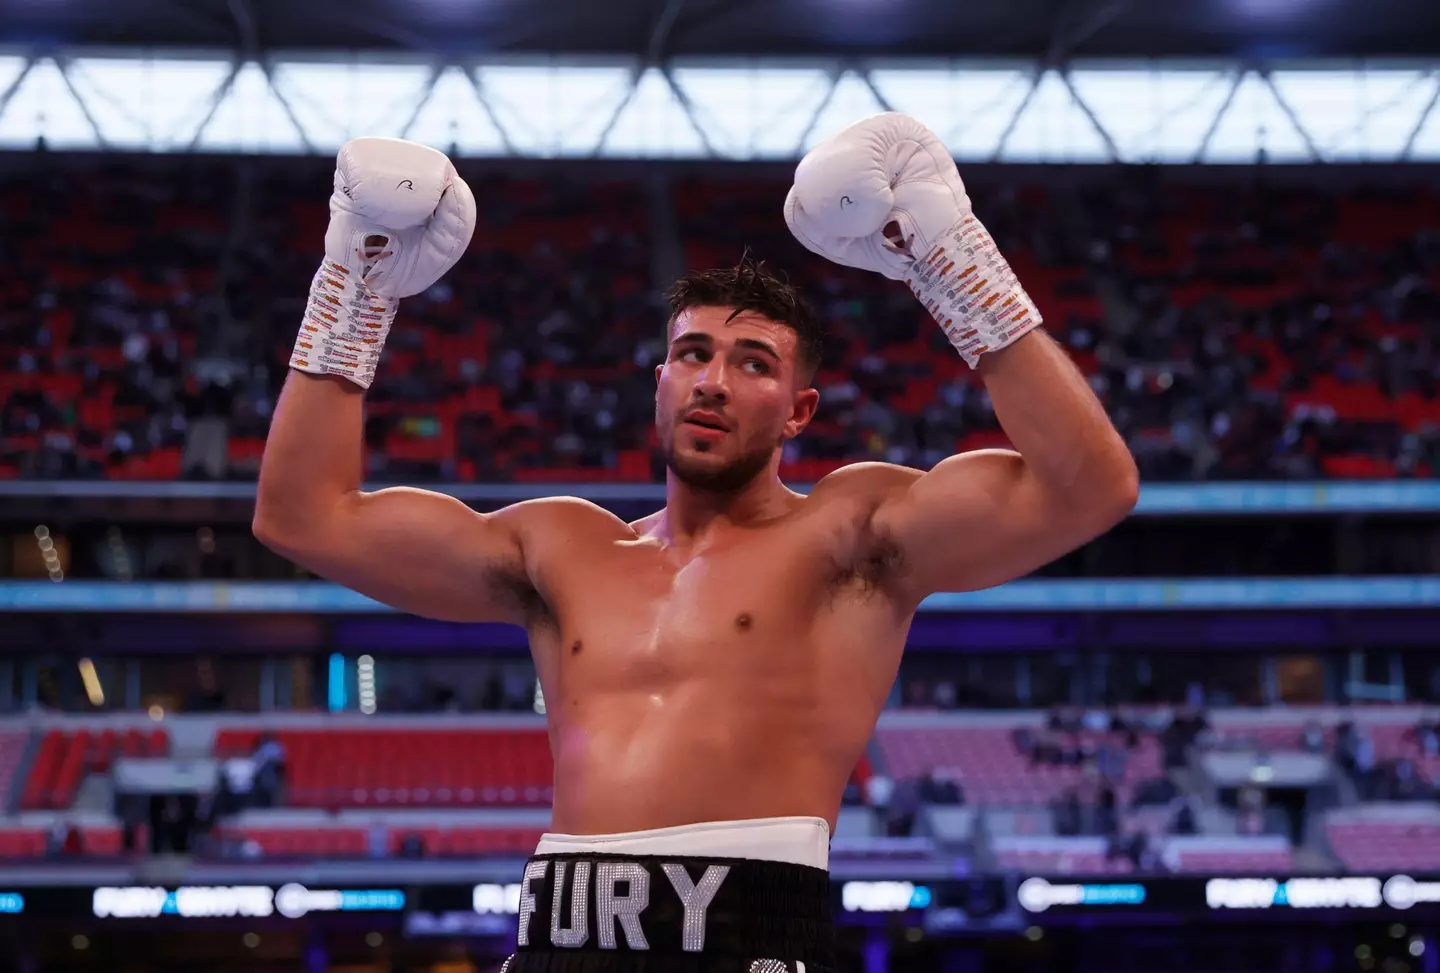 Tommy Fury was denied access to the US earlier this week.